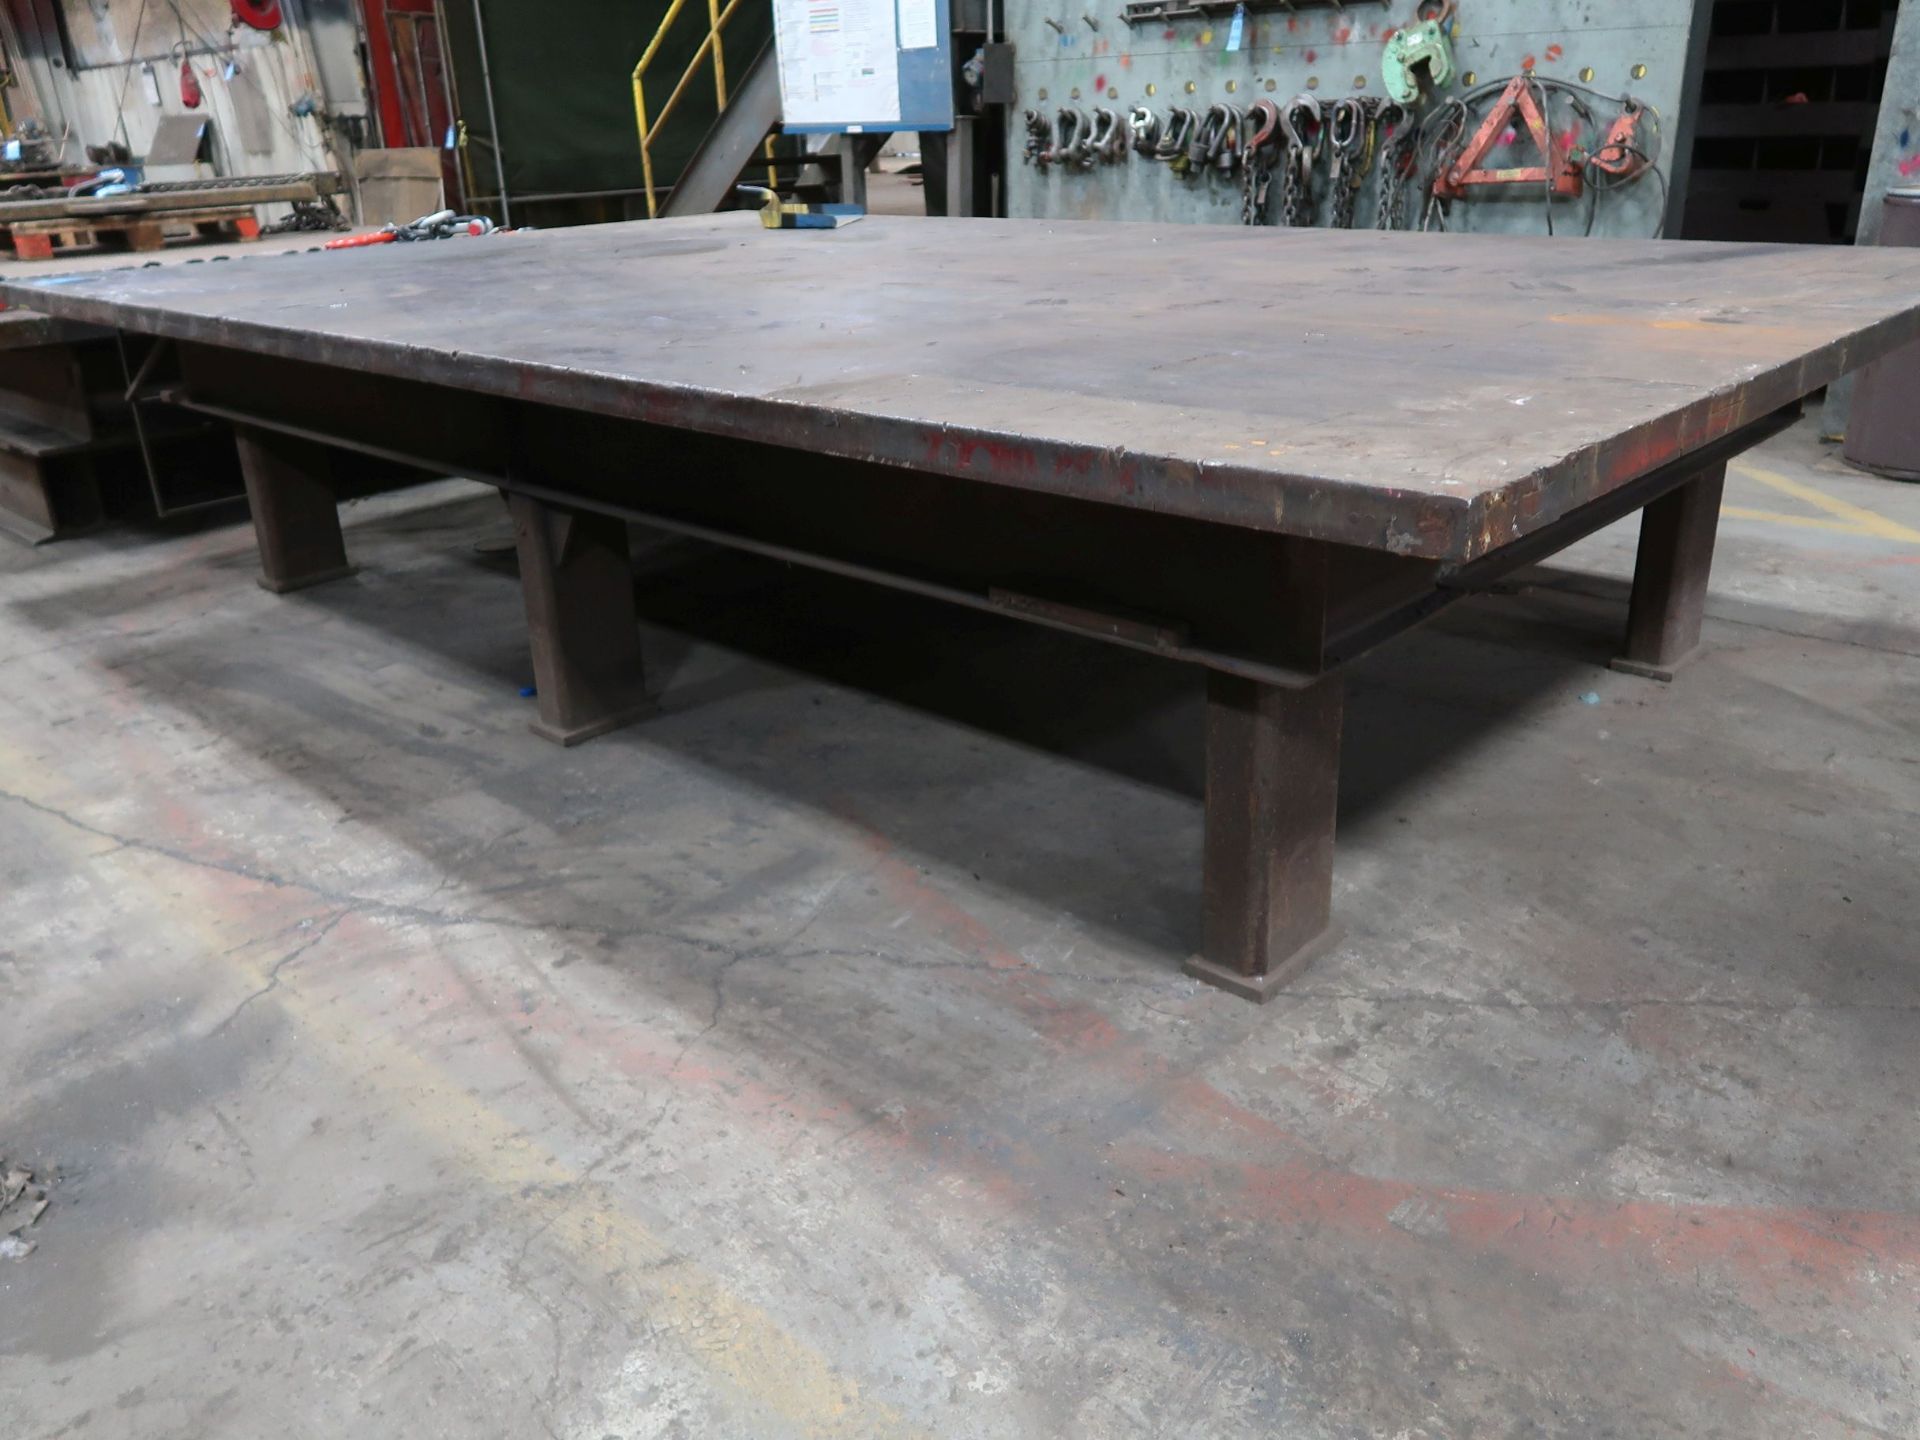 8' X 13' X 32" H X 2-1/4" THICK STEEL PLATE WELDING TABLE